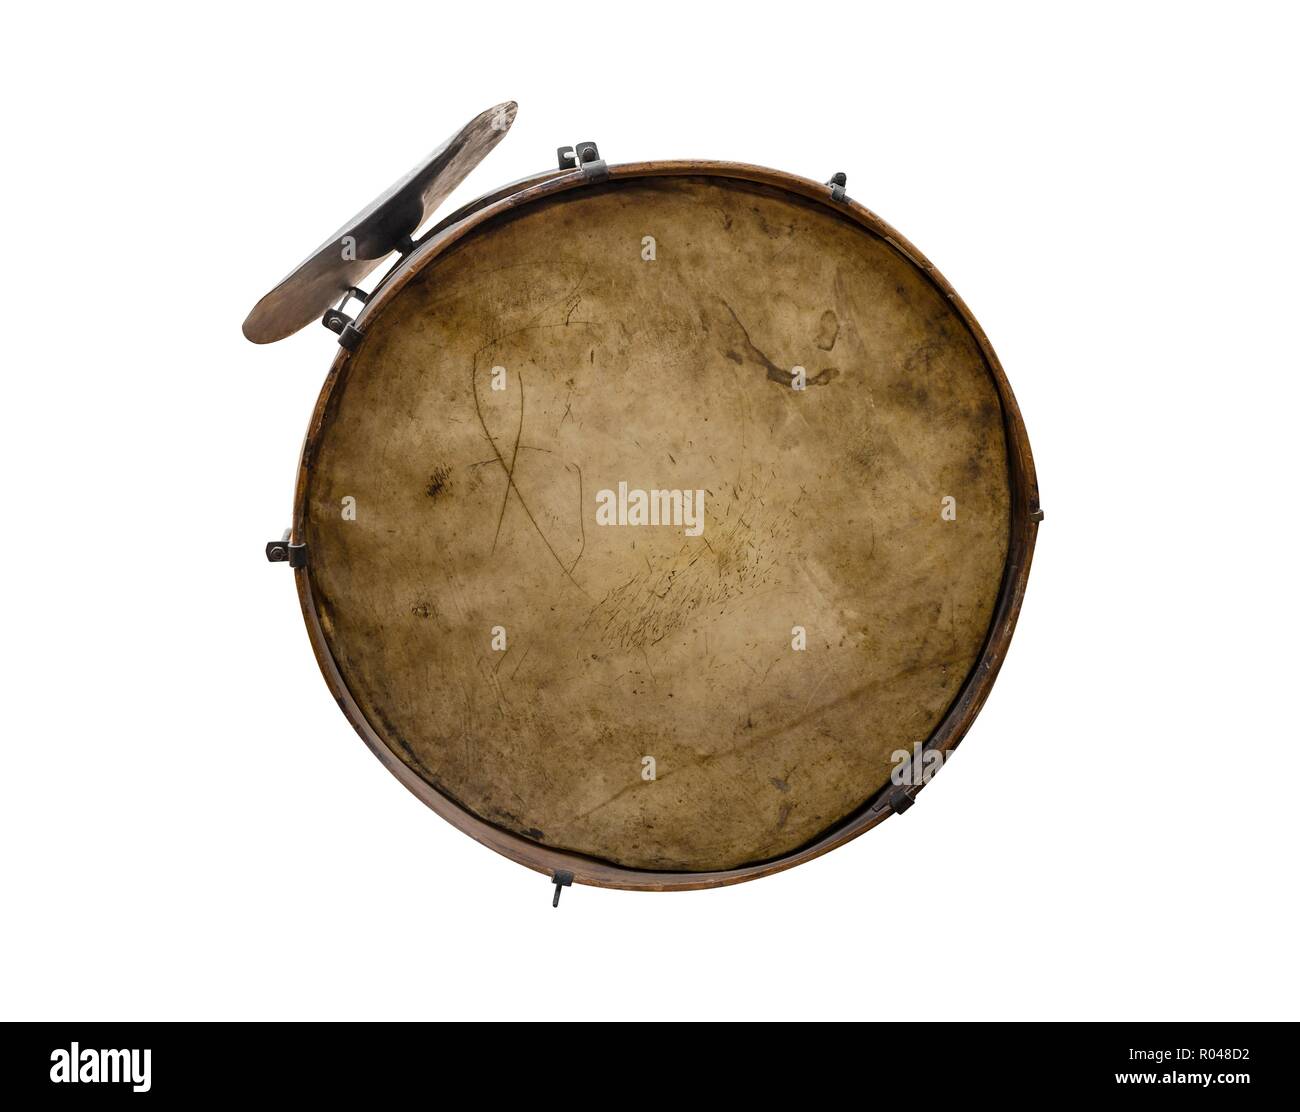 Vintage drum with shock plate on a white background. Stock Photo